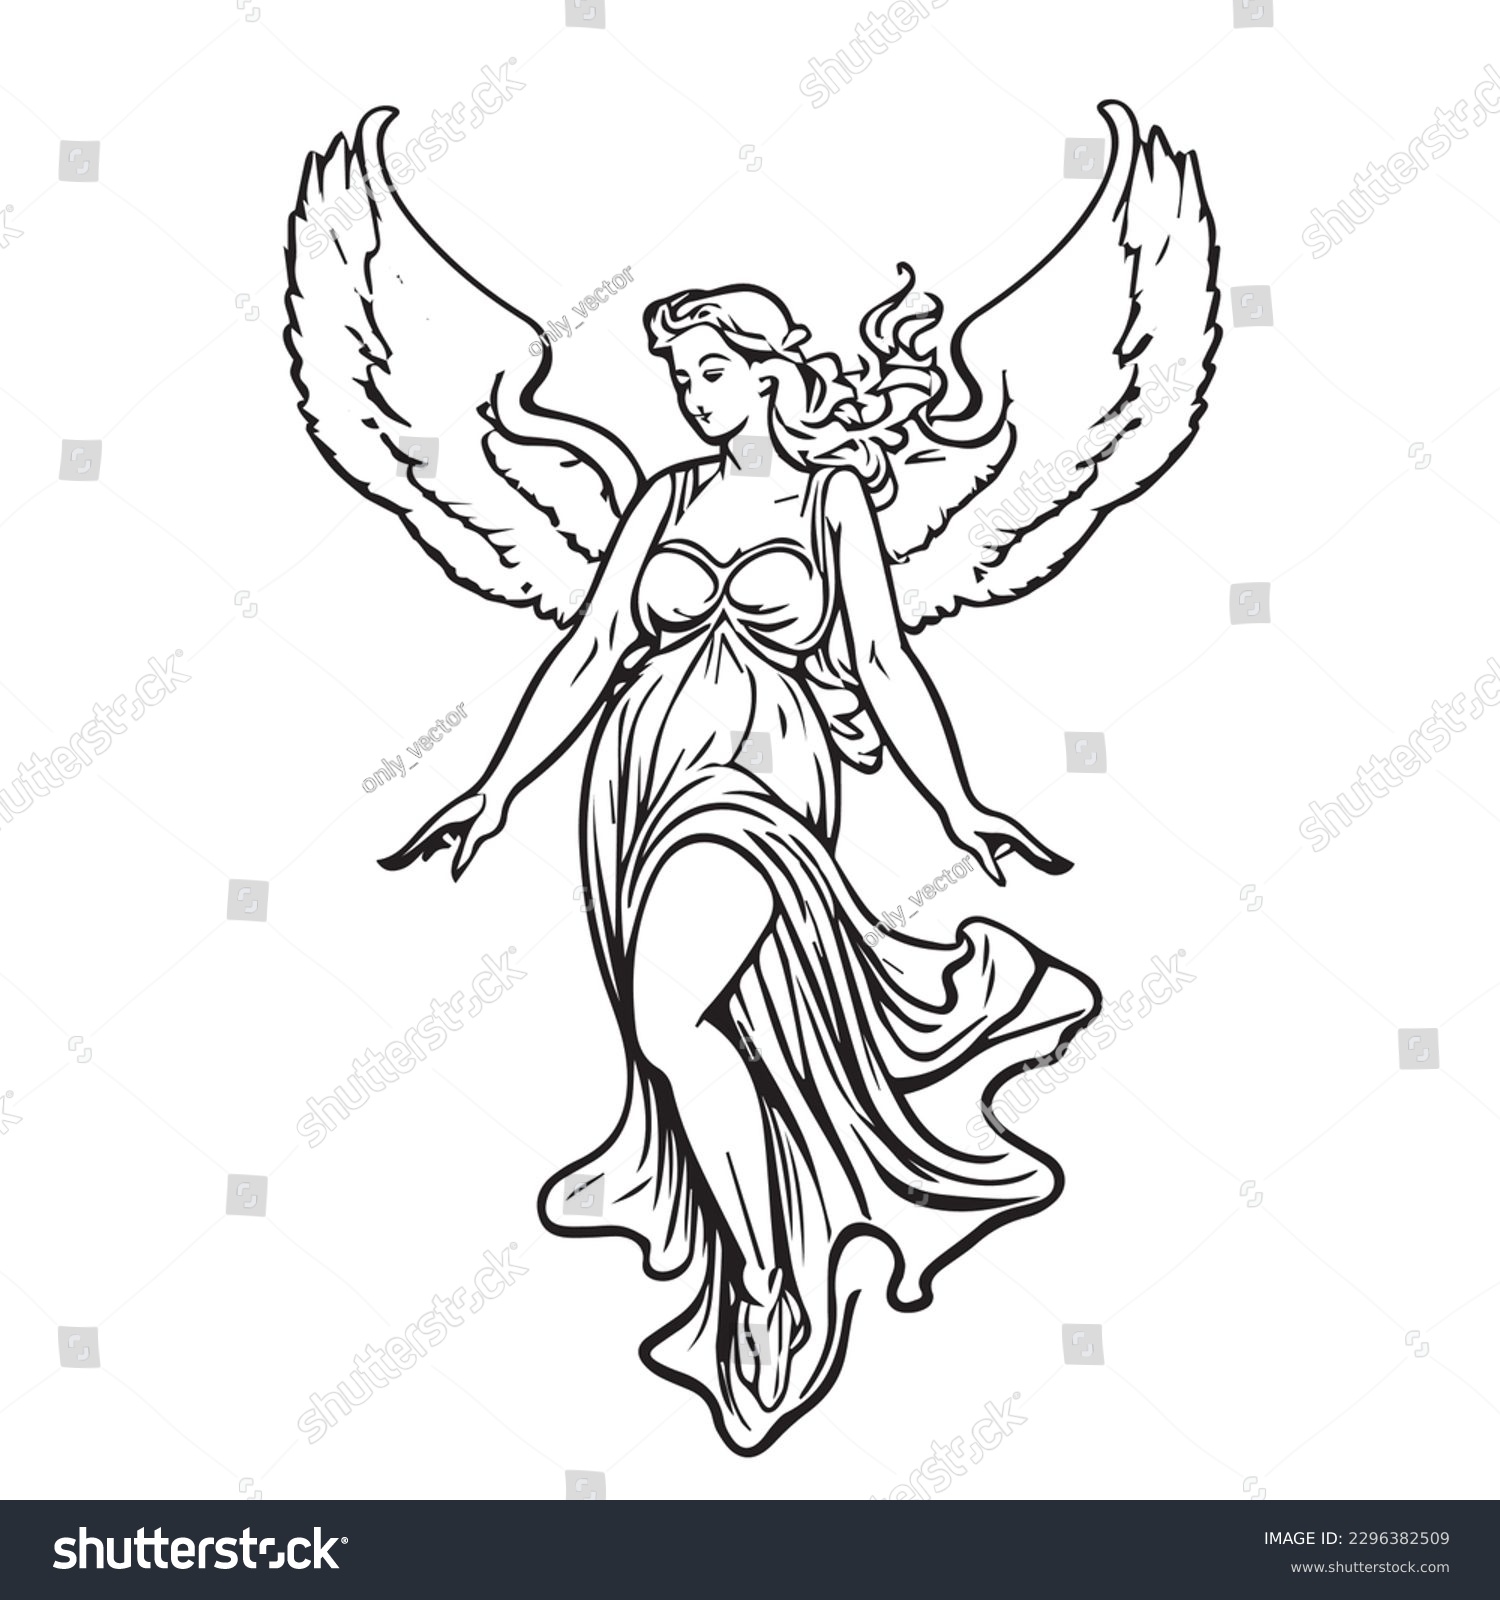 SVG of Angel woman. Vector illustration of female beauty angel. Silhouette svg, only black and white. svg